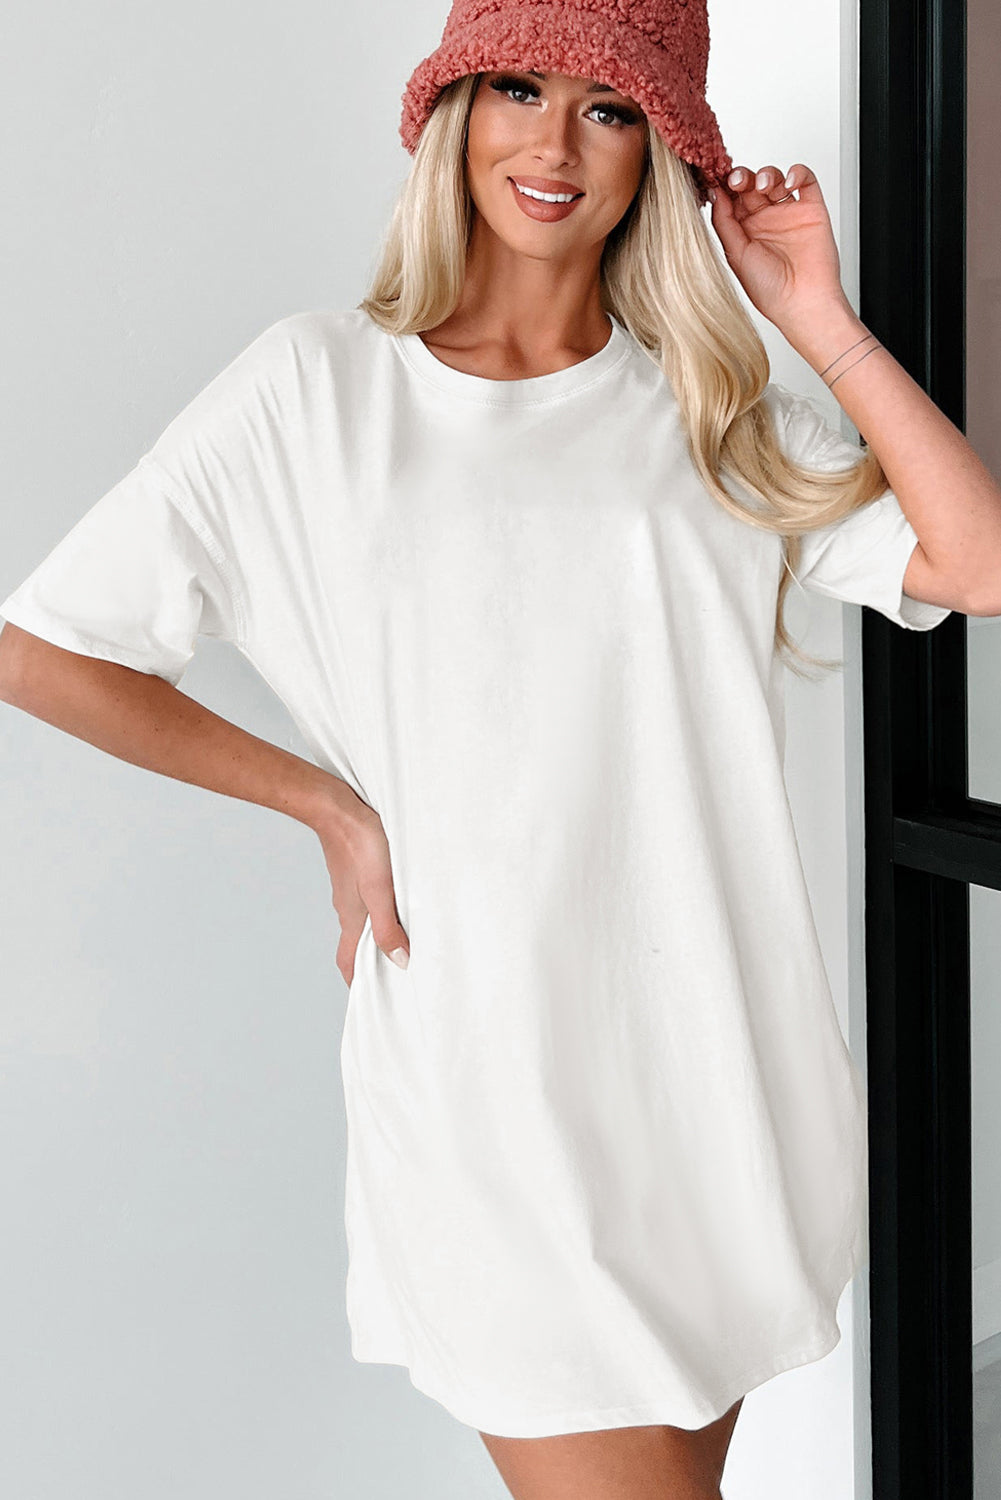 White Solid Color Round Neck Basic Tunic T Shirt